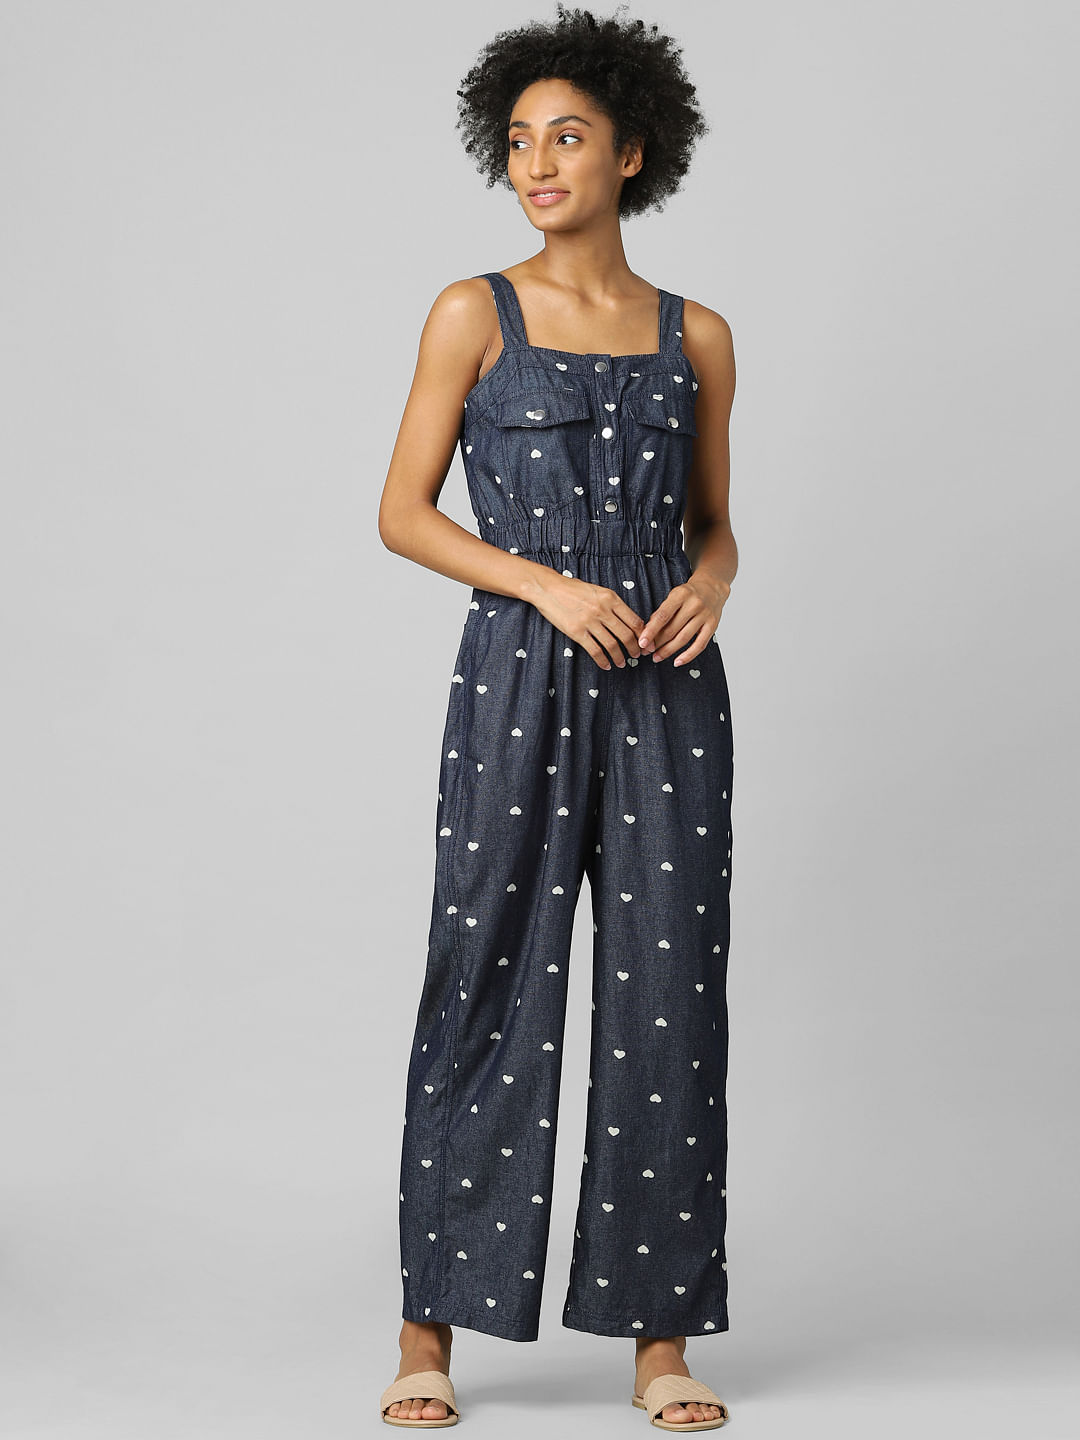 Buy ONLY Women's Jumpsuit at Amazon.in